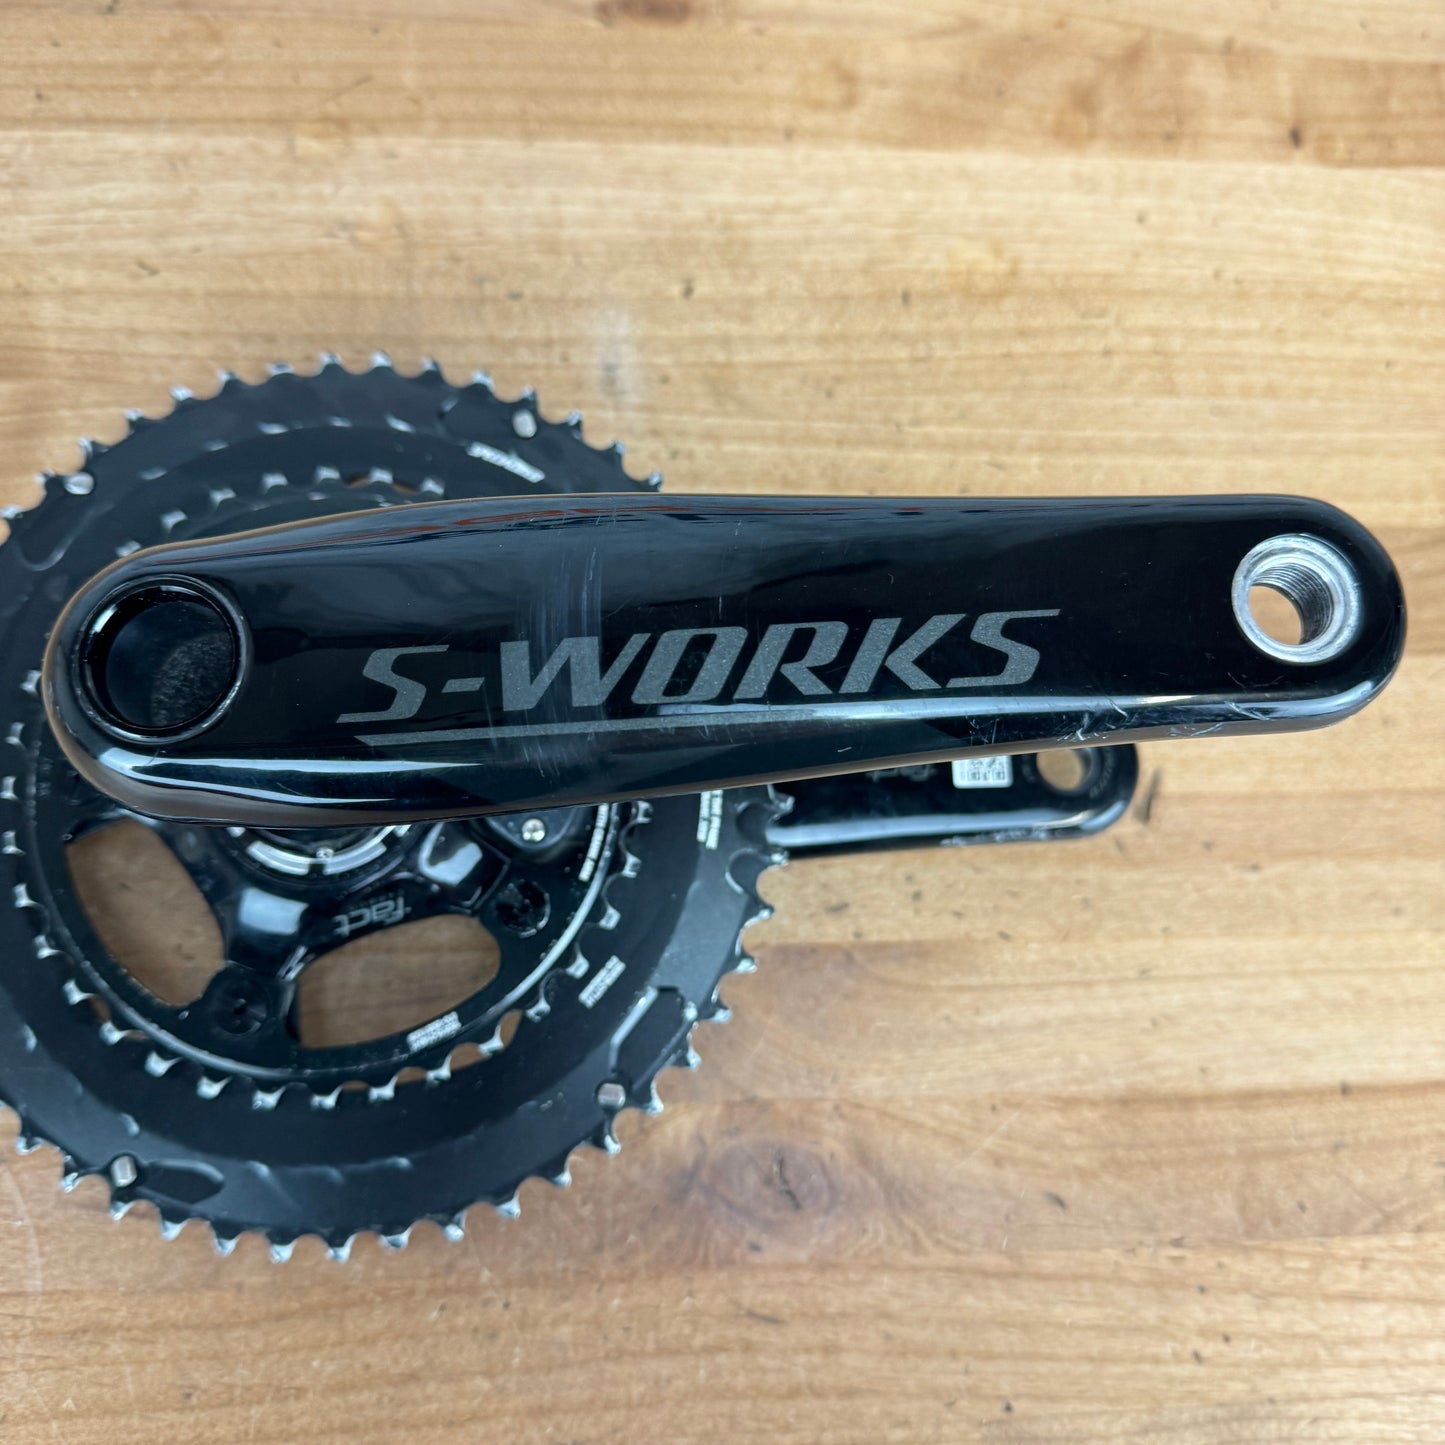 Specialized FACT Carbon Power Cranks Dual Sided Power Meter 175mm 52/36t Crankset